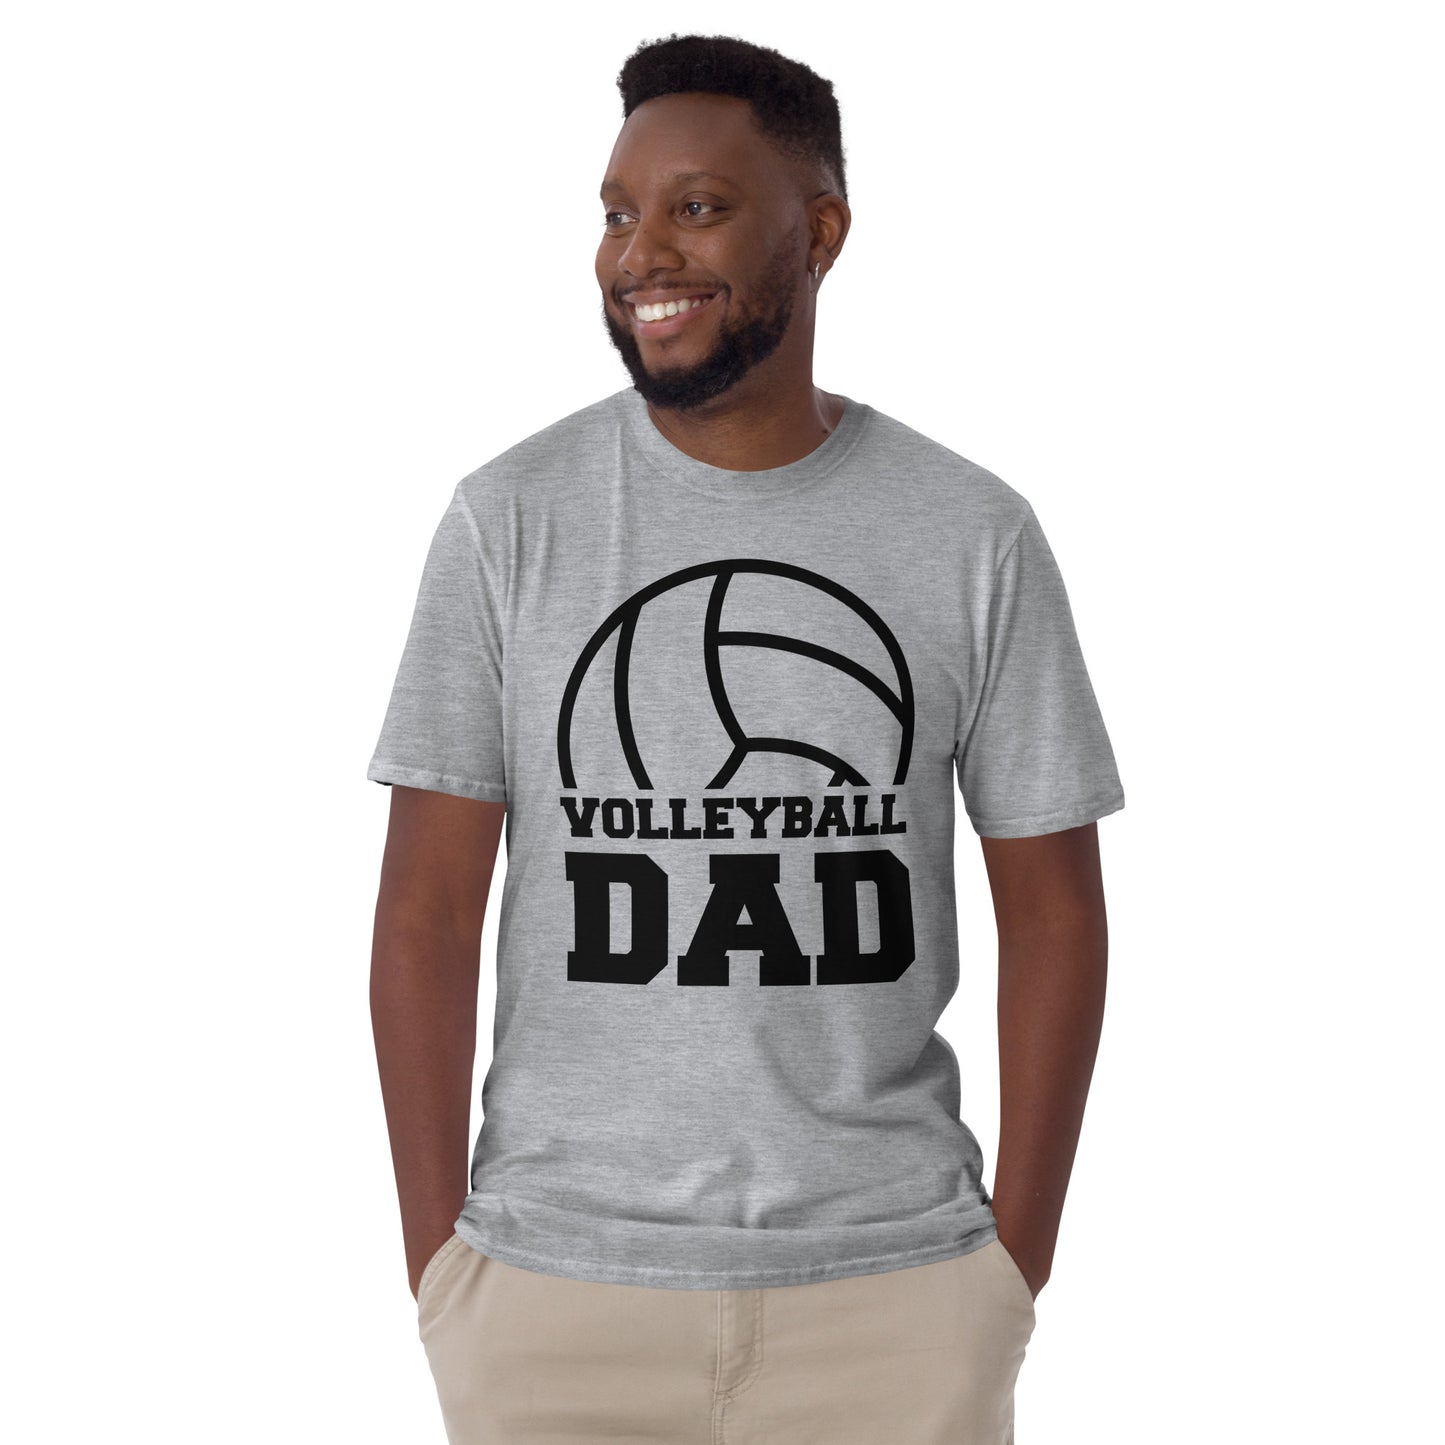 "Volleyball Dad" Personalized T-shirt